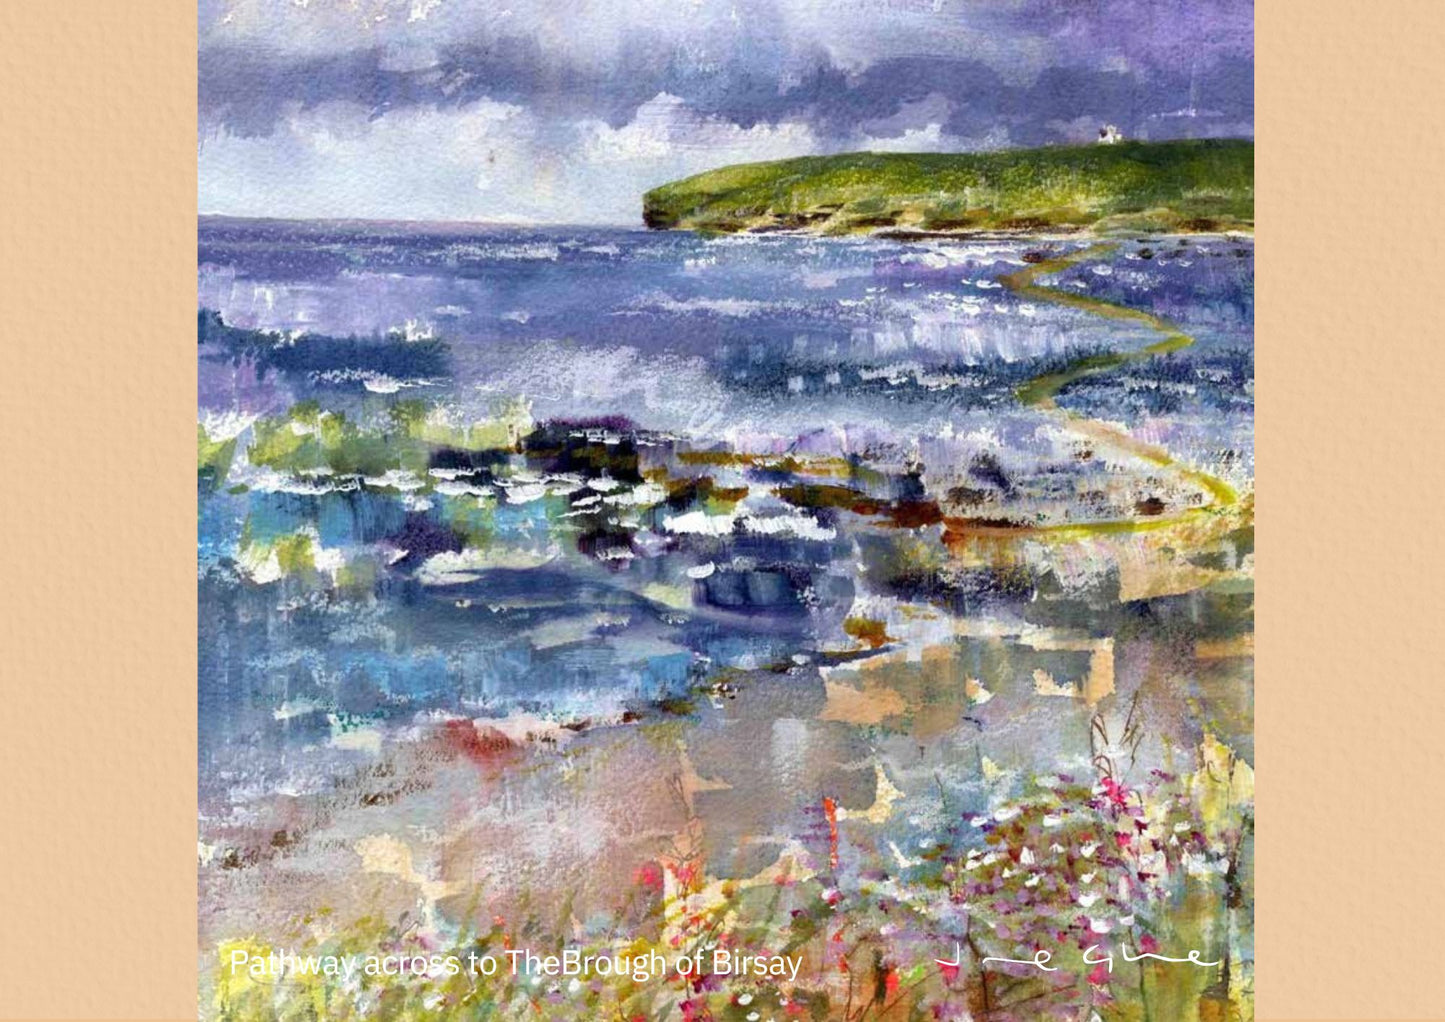 Orkney calendar 2025 August page with mixed media painting of The Brough of Birsay by Orkney artist Jane Glue